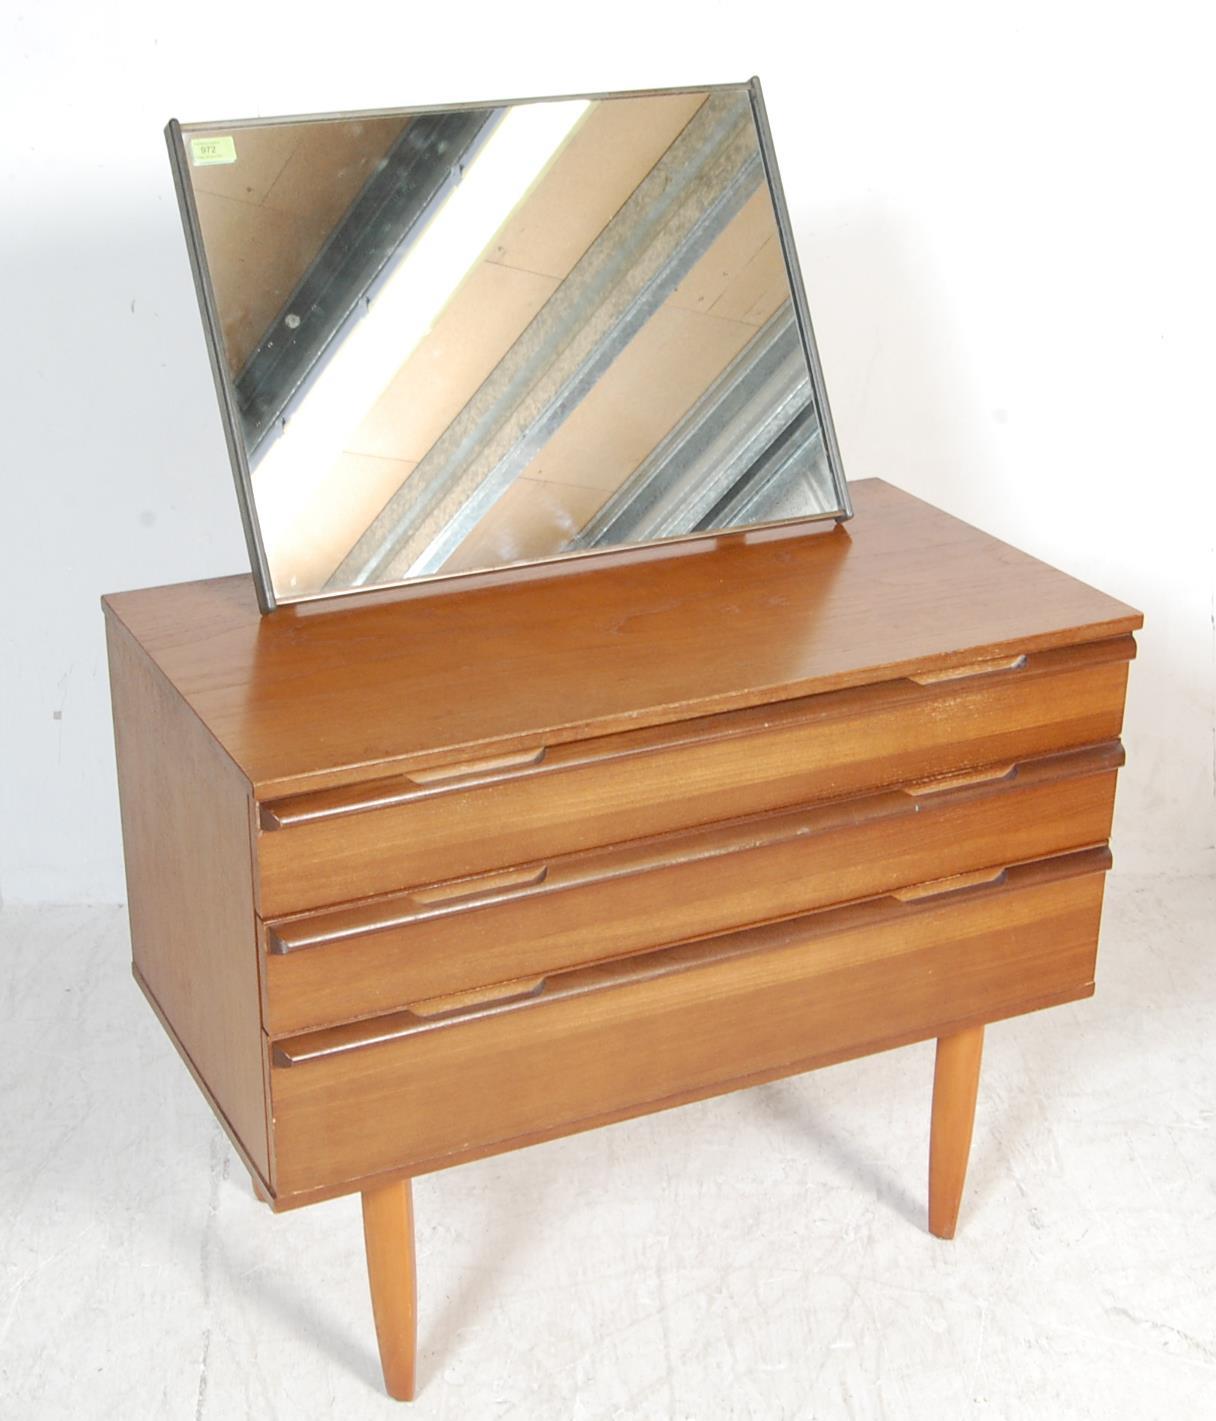 VINTAGE 20TH CENTURY TEAK WOOD DRESSING TABLE CHEST BY AVALON - Image 2 of 6